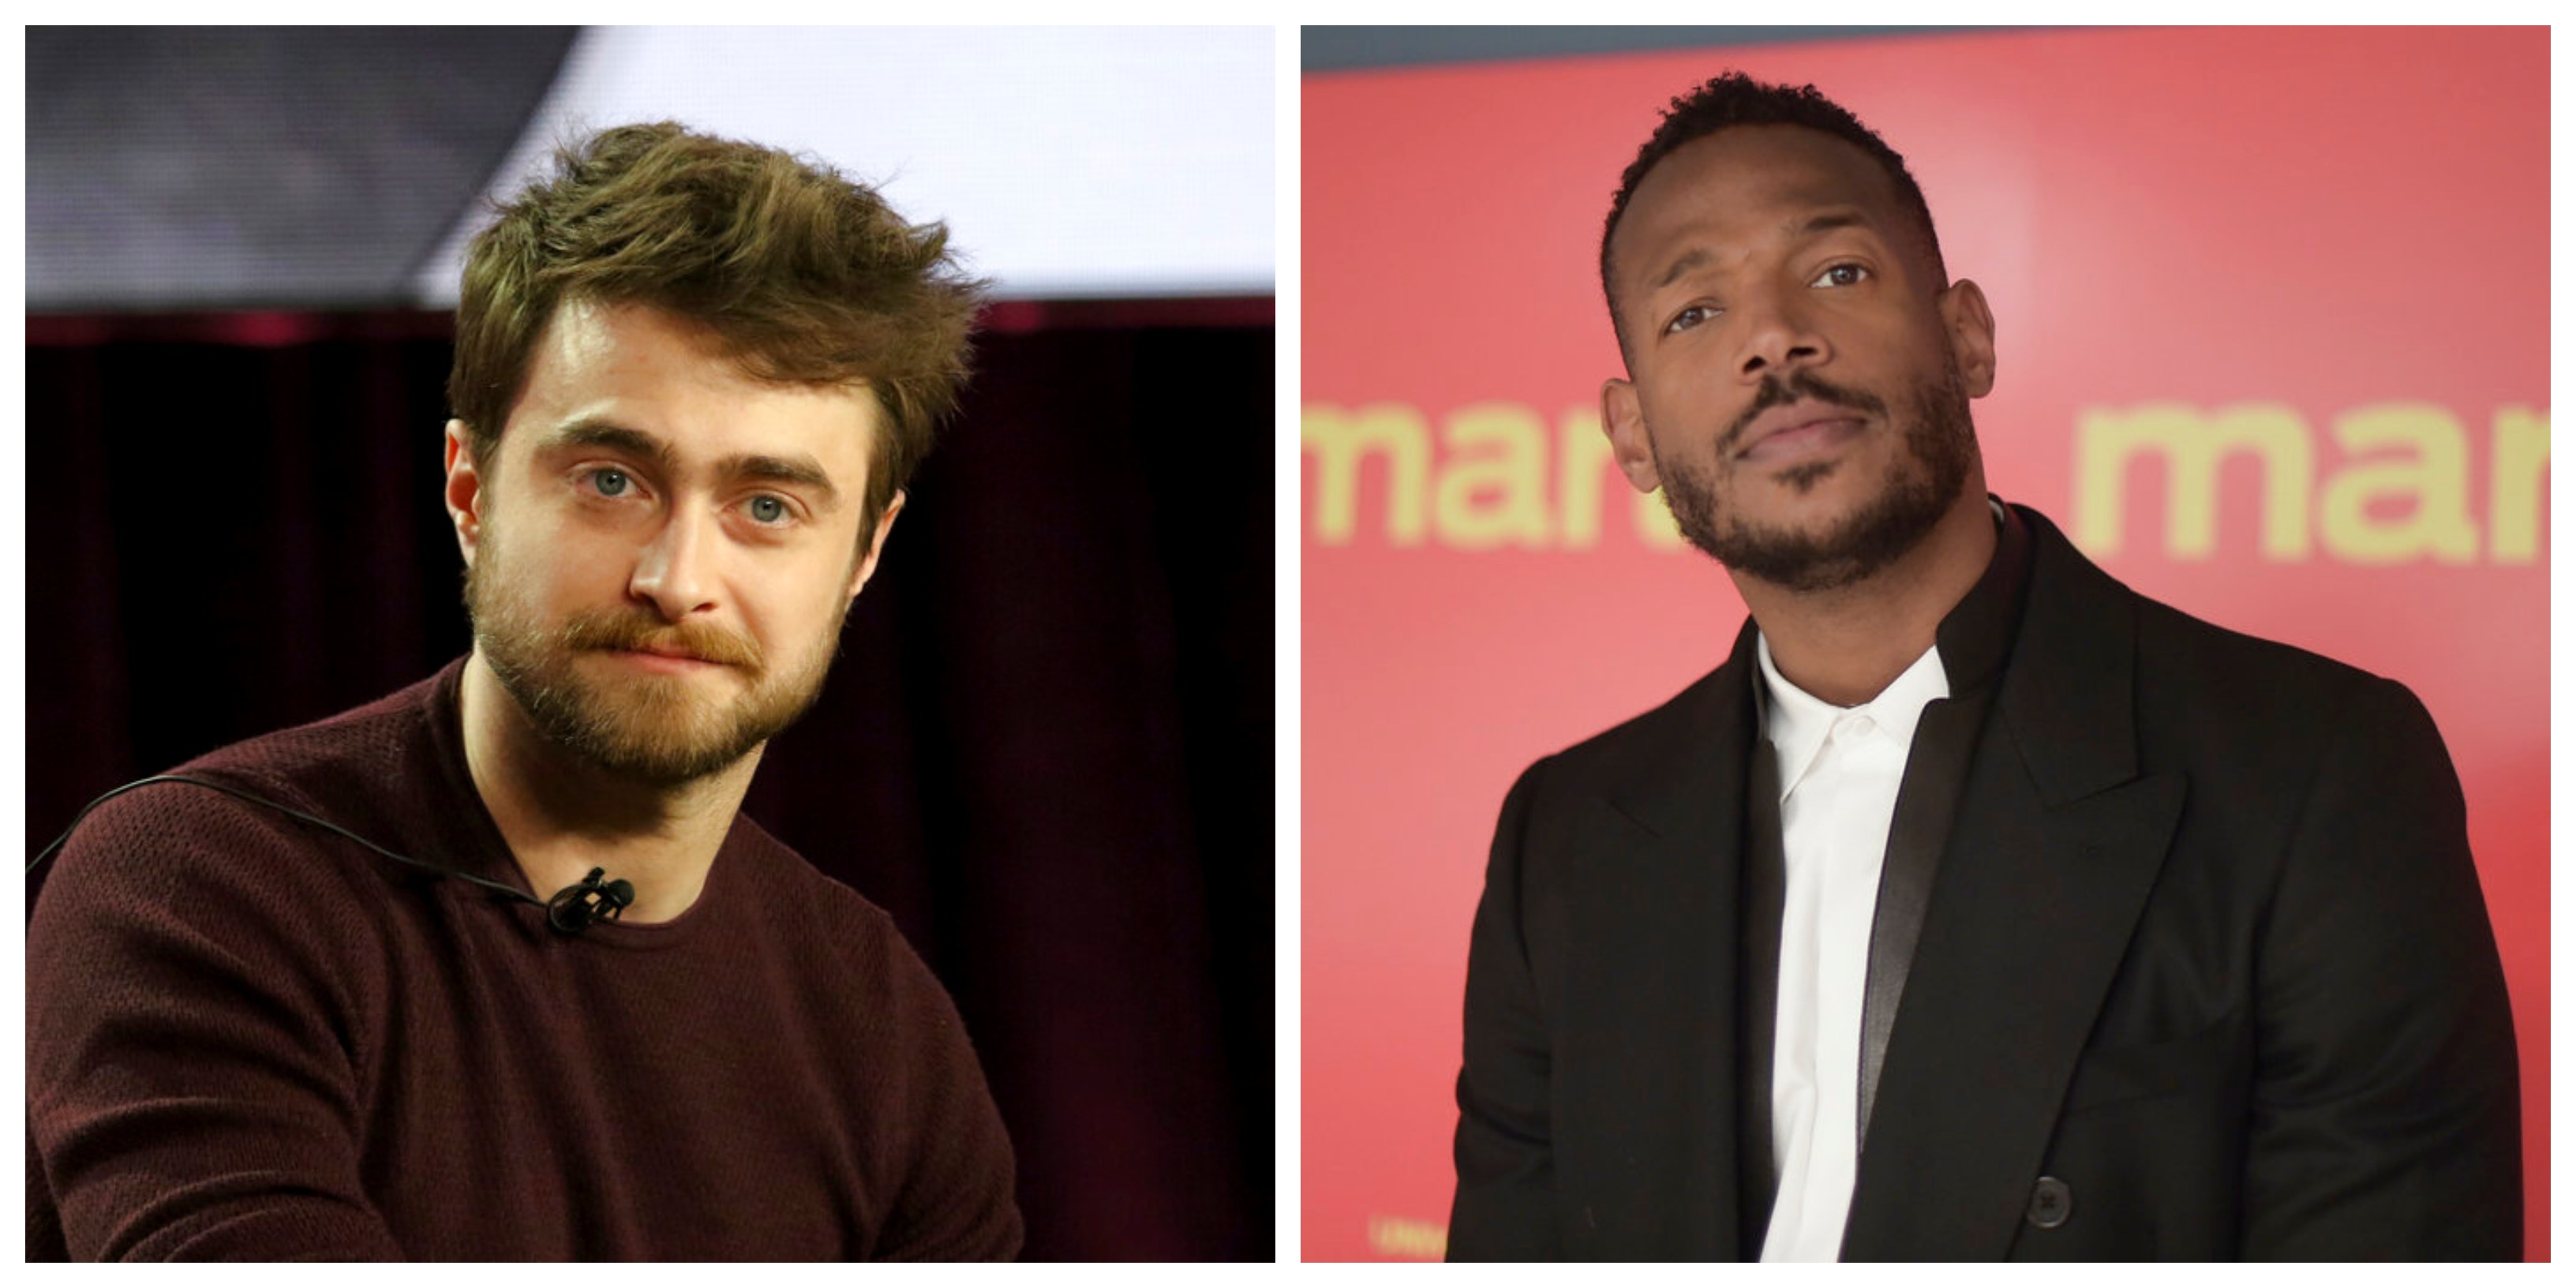 Today S Famous Birthdays List For July 23 Includes Celebrities Daniel Radcliffe Marlon Wayans Cleveland Com